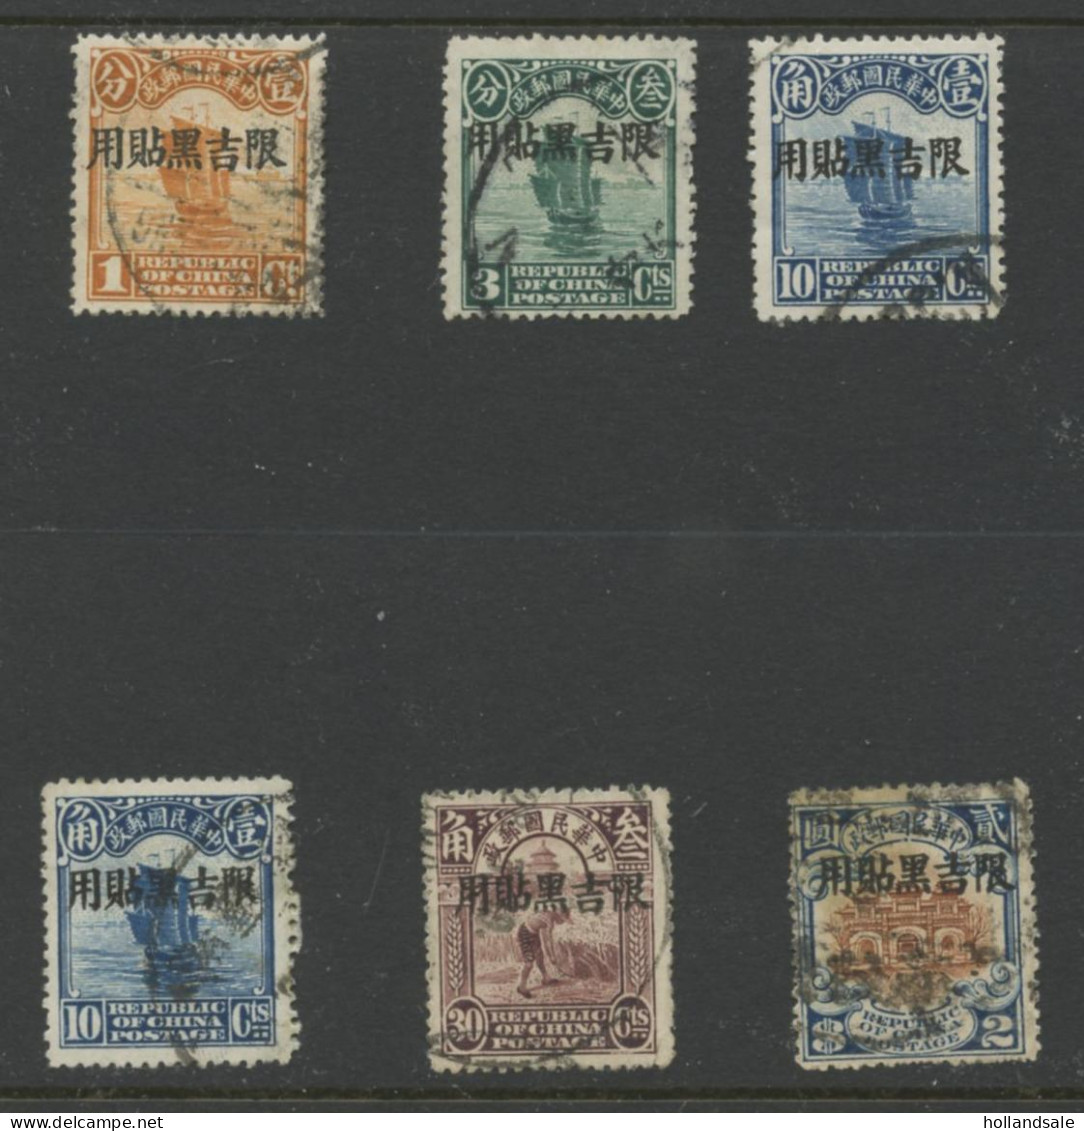 CHINA / Province Manchuria - Six (6) Overprinted Stamps. Used. Including $2. - Mandschurei 1927-33